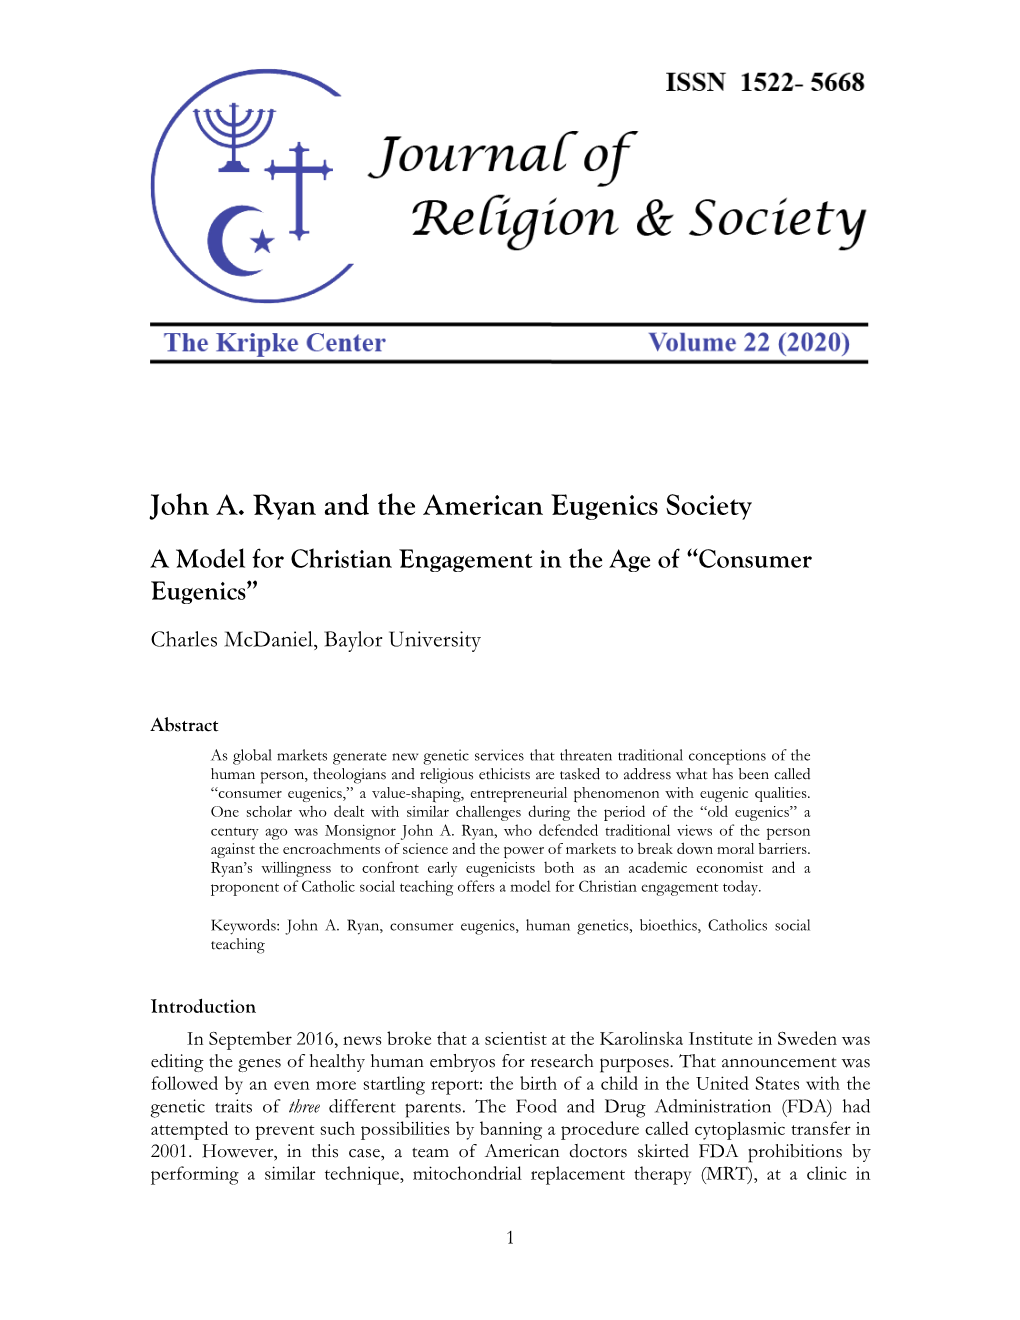 John A. Ryan and the American Eugenics Society a Model for Christian Engagement in the Age of “Consumer Eugenics”